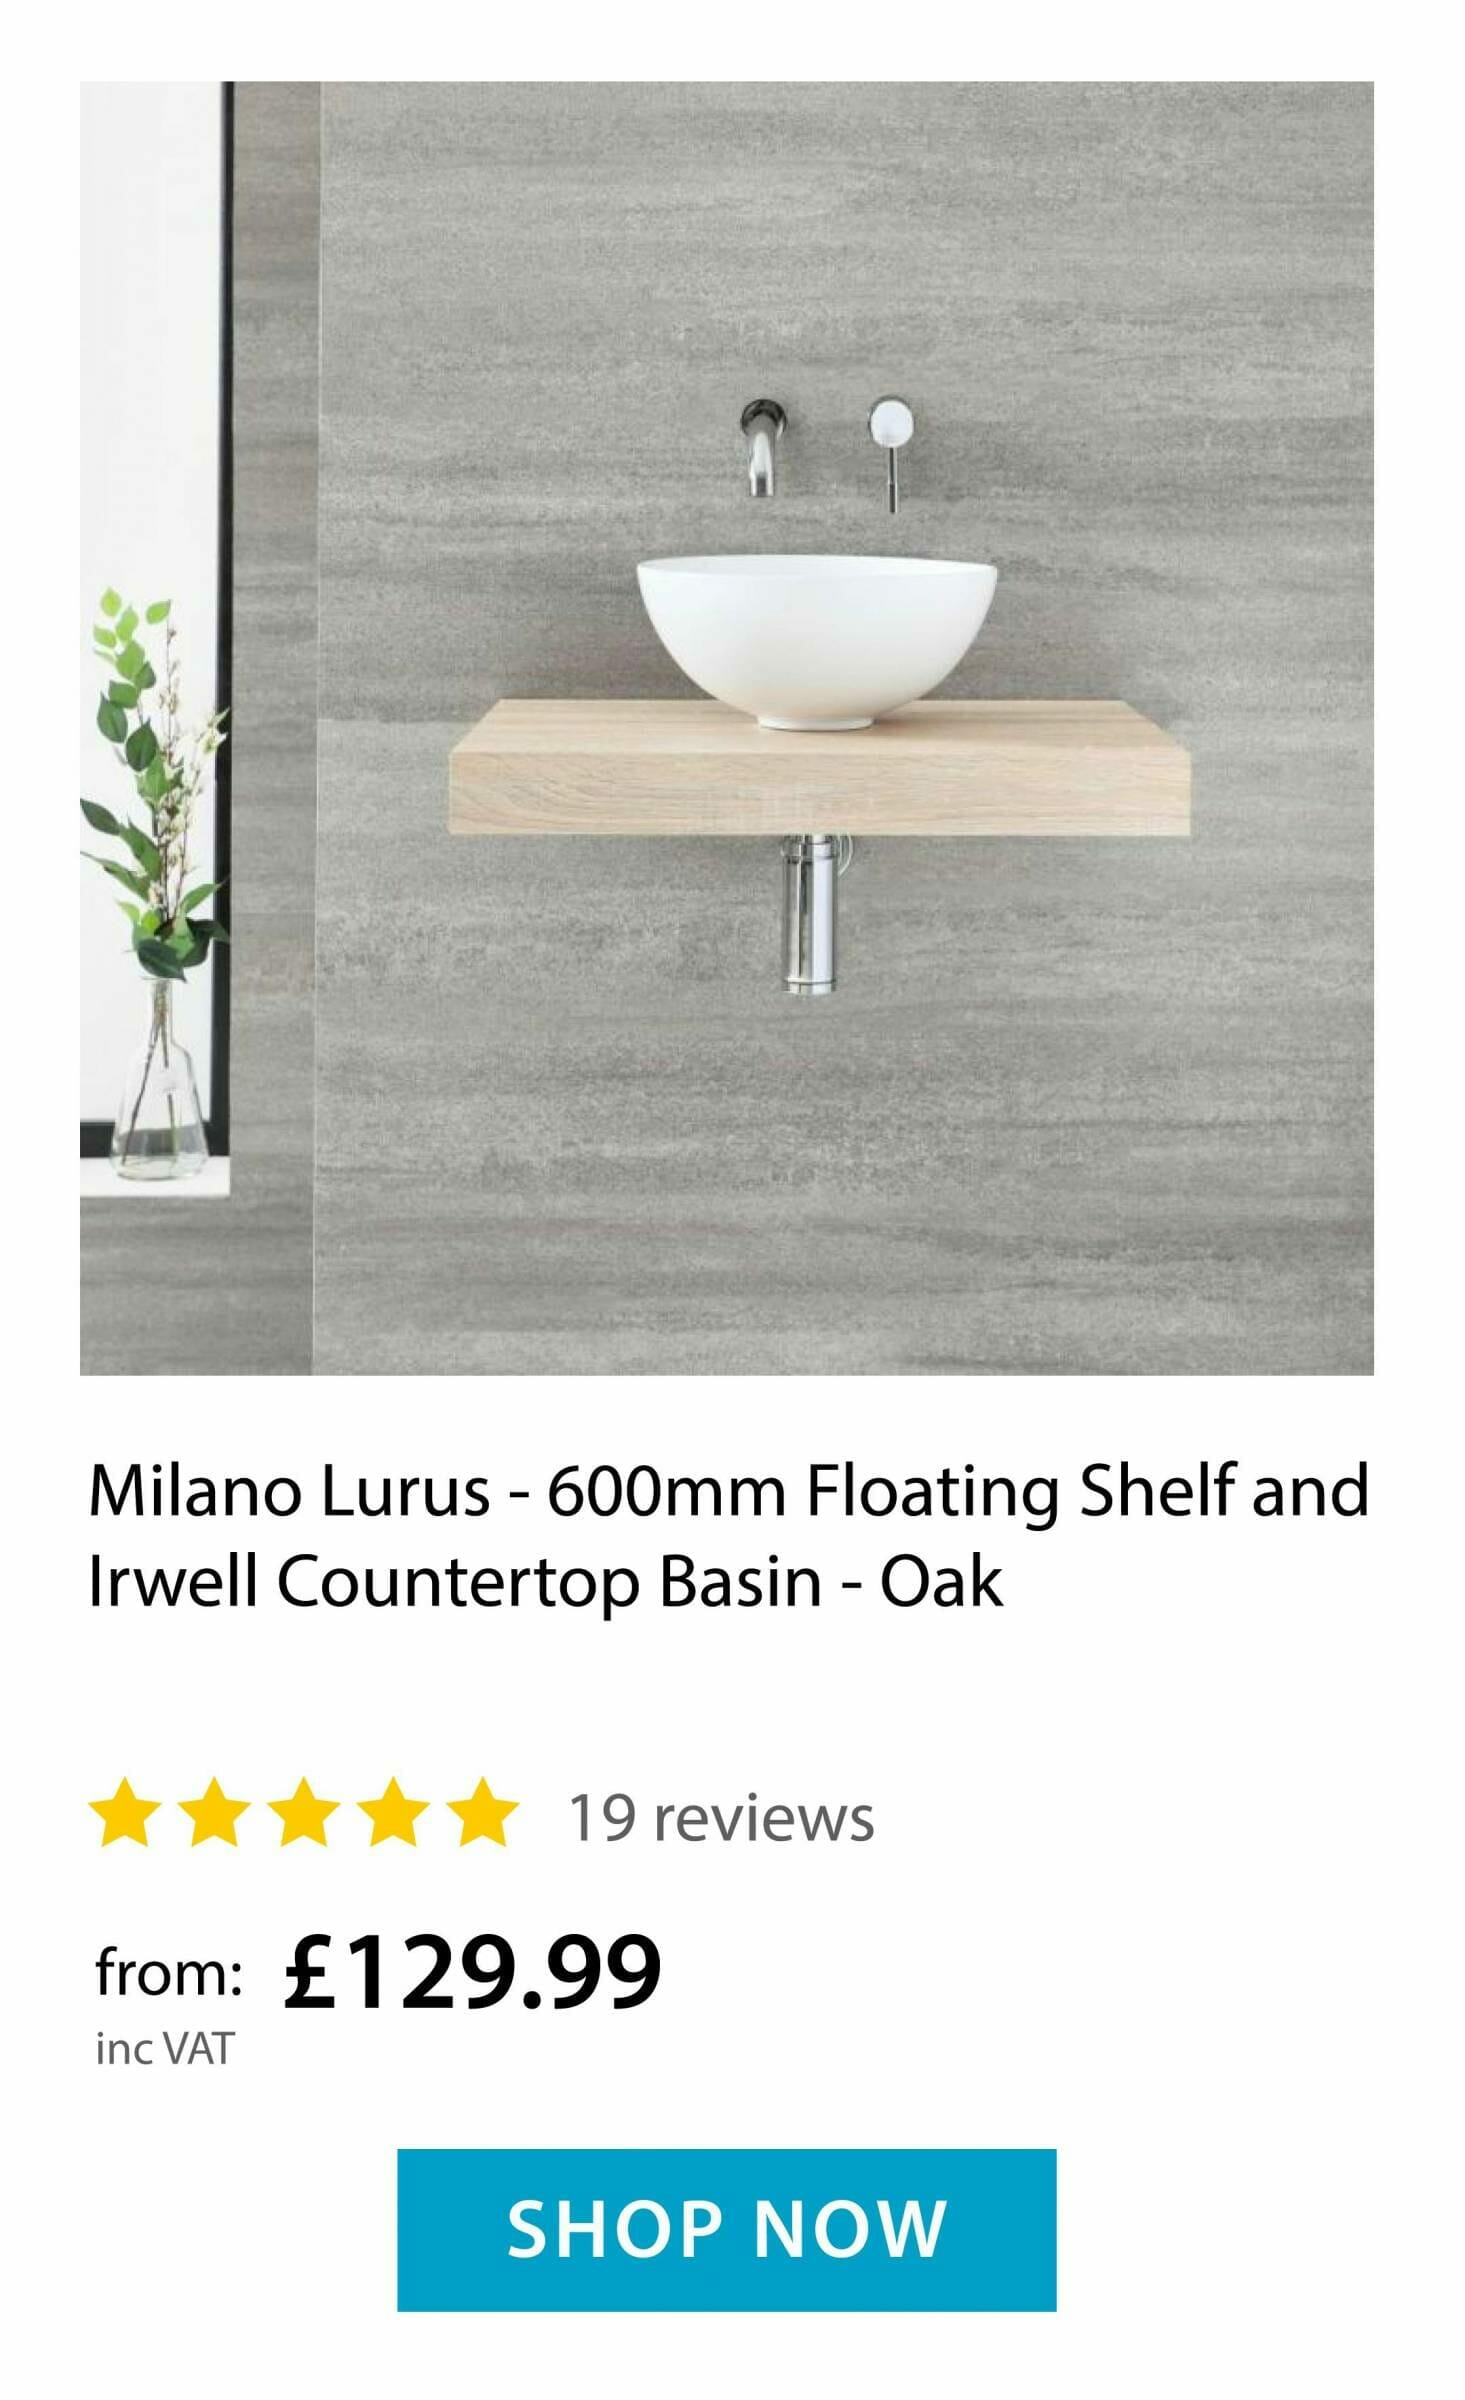 Countertop Basin with Floating Shelf 